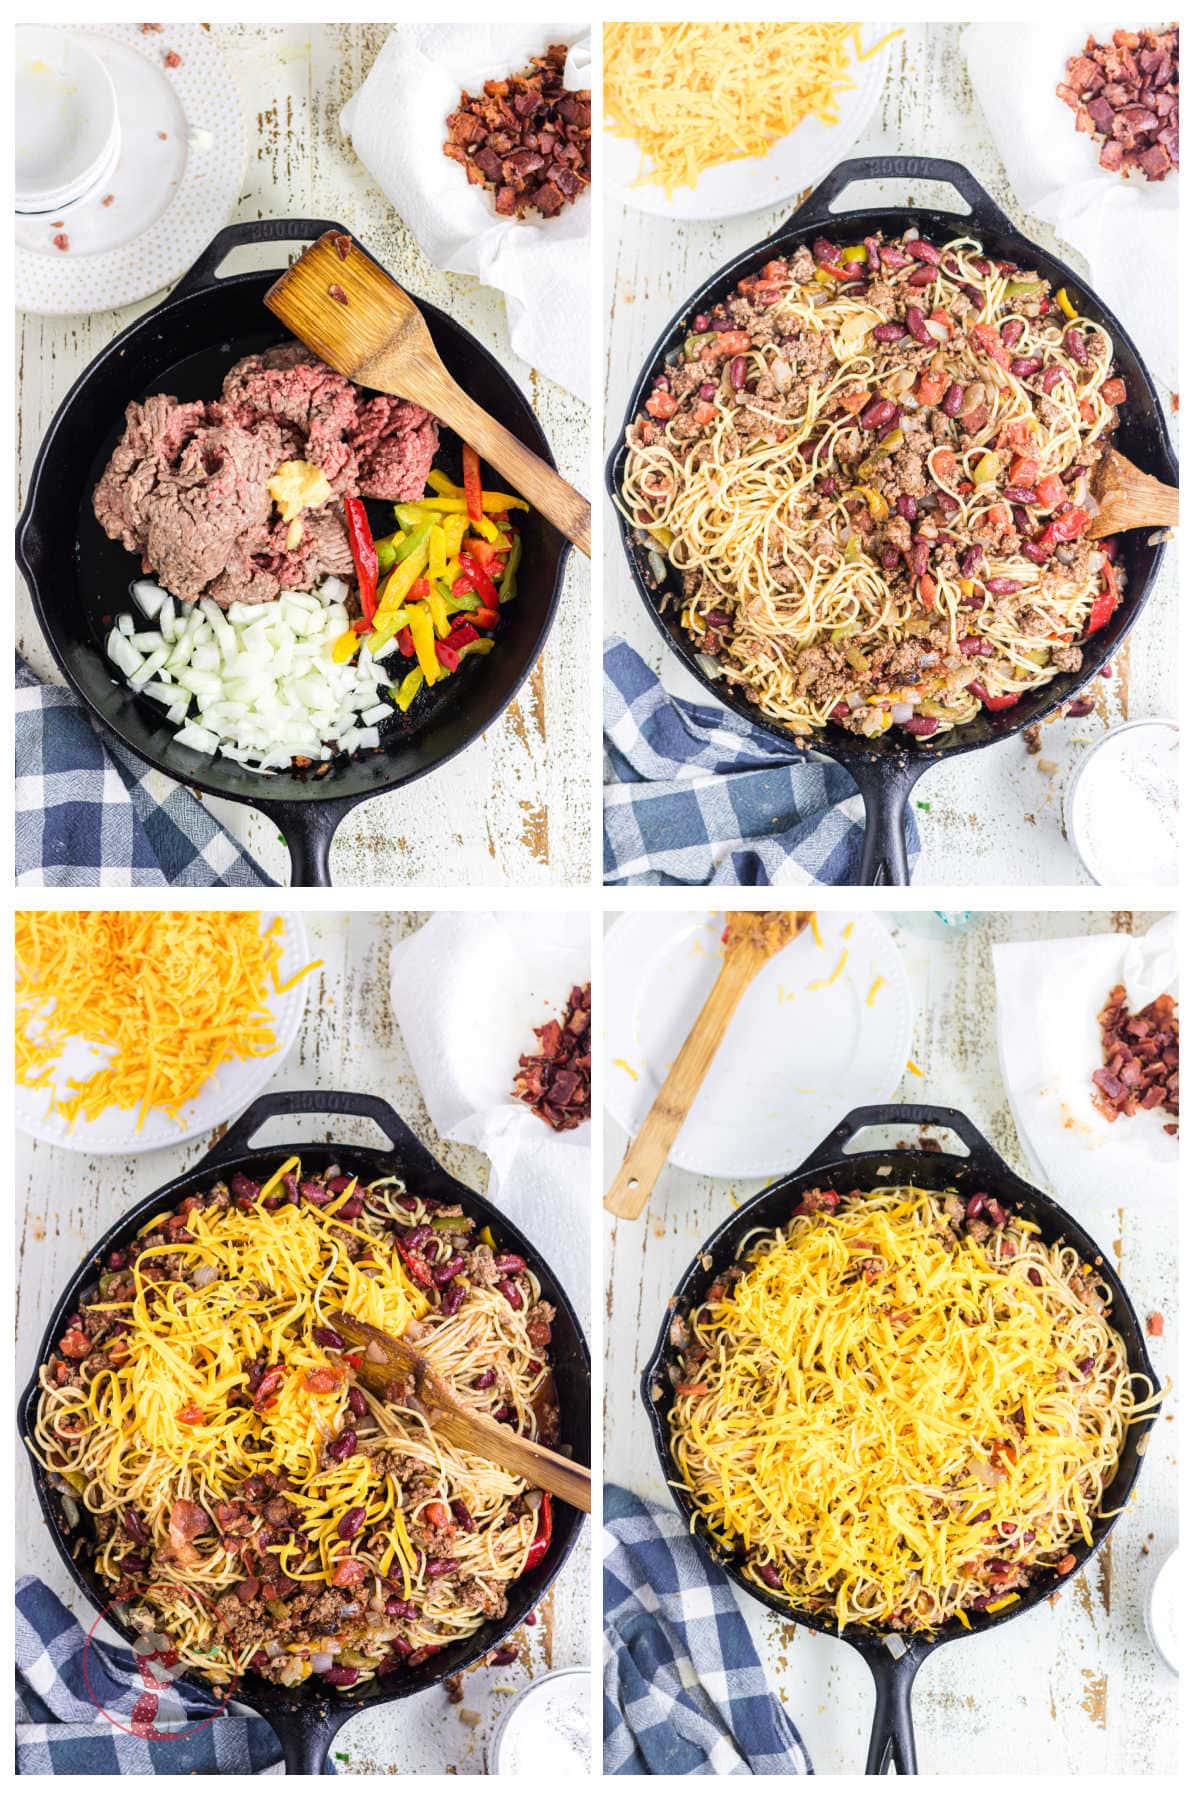 Step by step images showing how to make cowboy spaghetti.